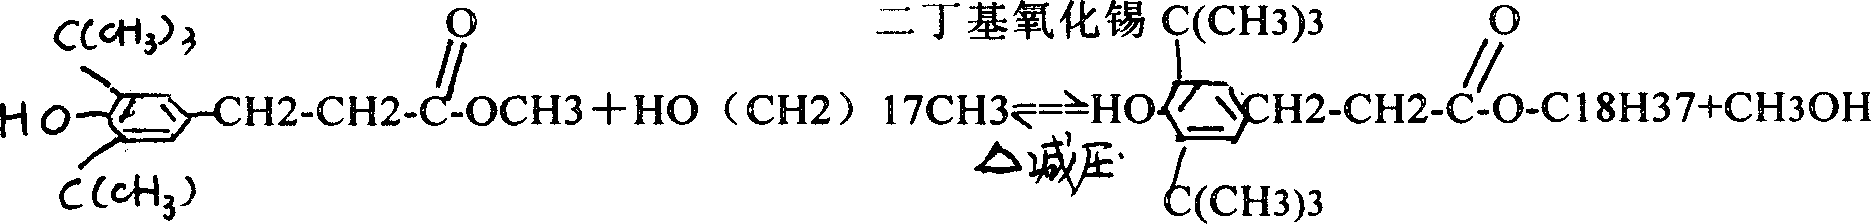 Two-step industrial synthesis method of beta-(3,5-di tertiary butyl-4-hydroxyl phenyl )octadecyl propionate